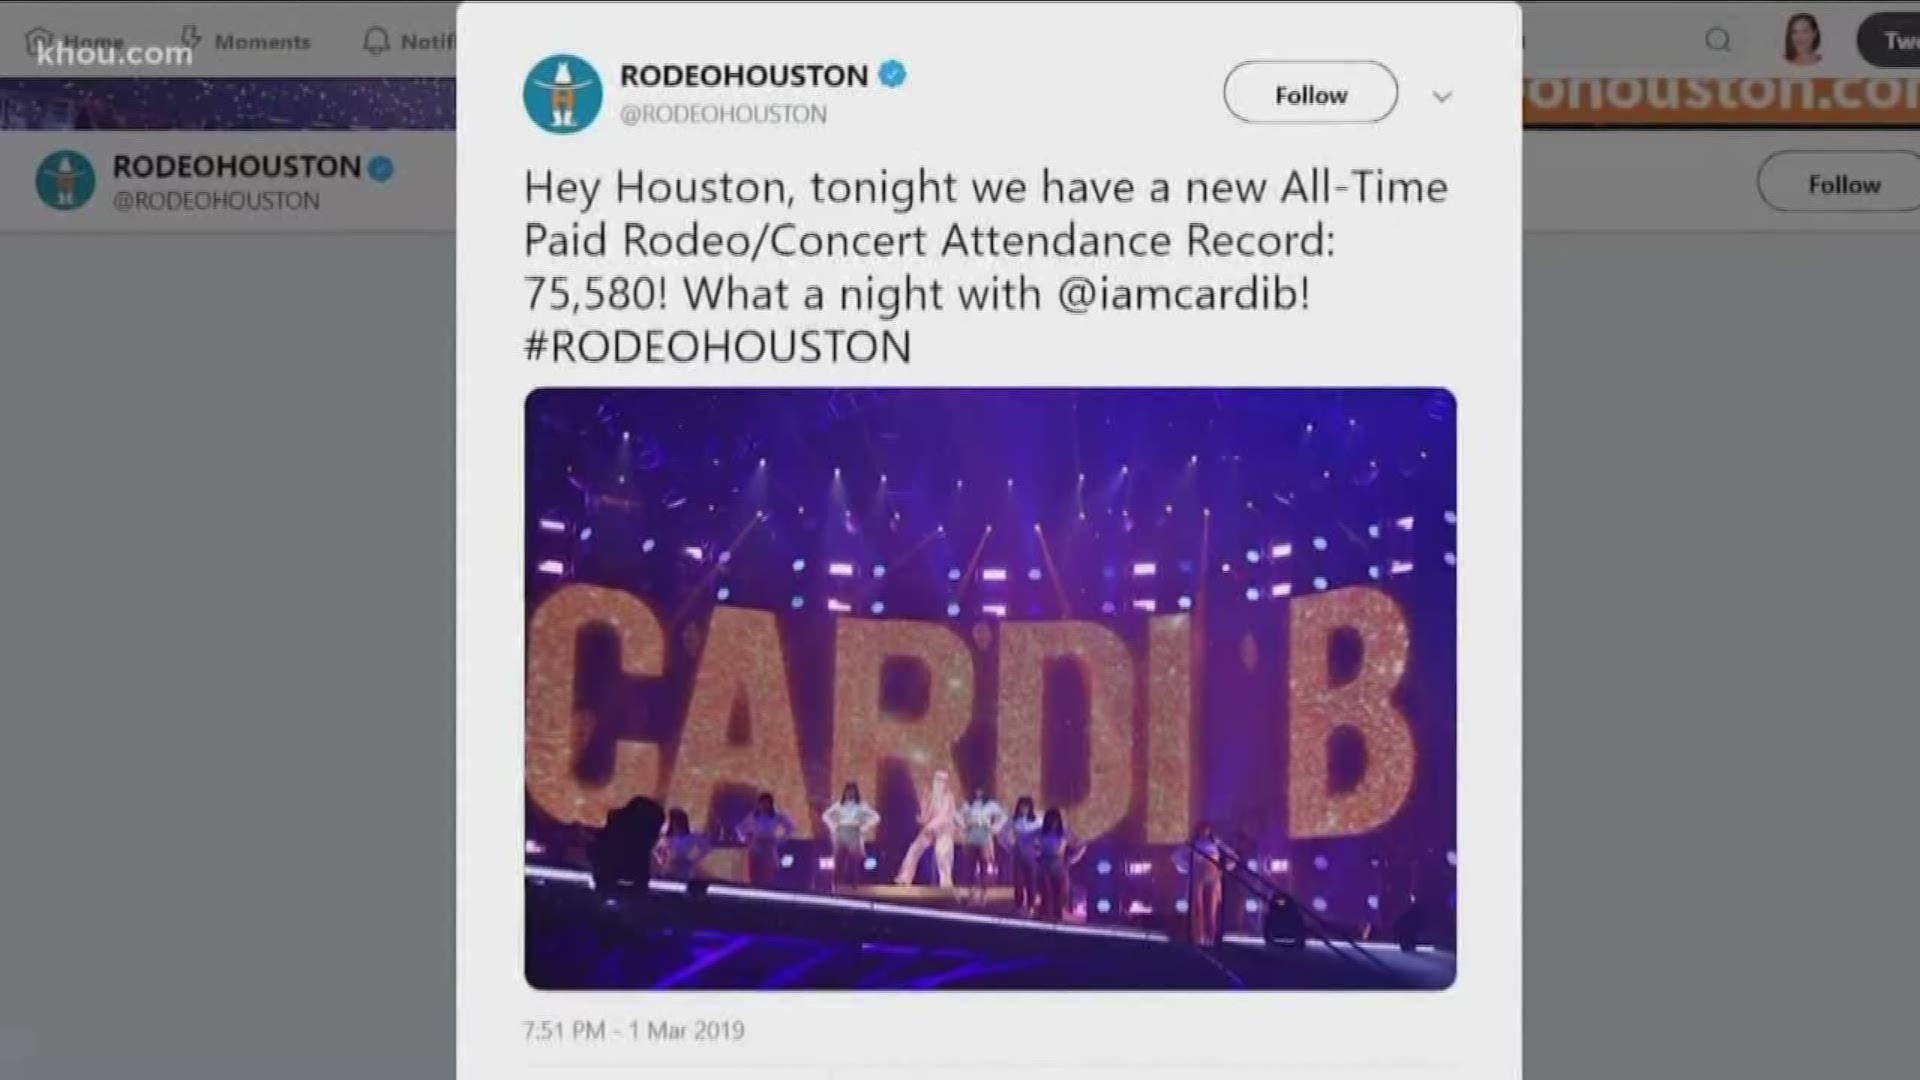 Cardi B officially broke the rodeo's attendance record. At least that's what rodeo officials announced after the rapper's performance on Friday. But some of you aren't buying it, so we sent Reporter Stephanie Whitfield to verify.